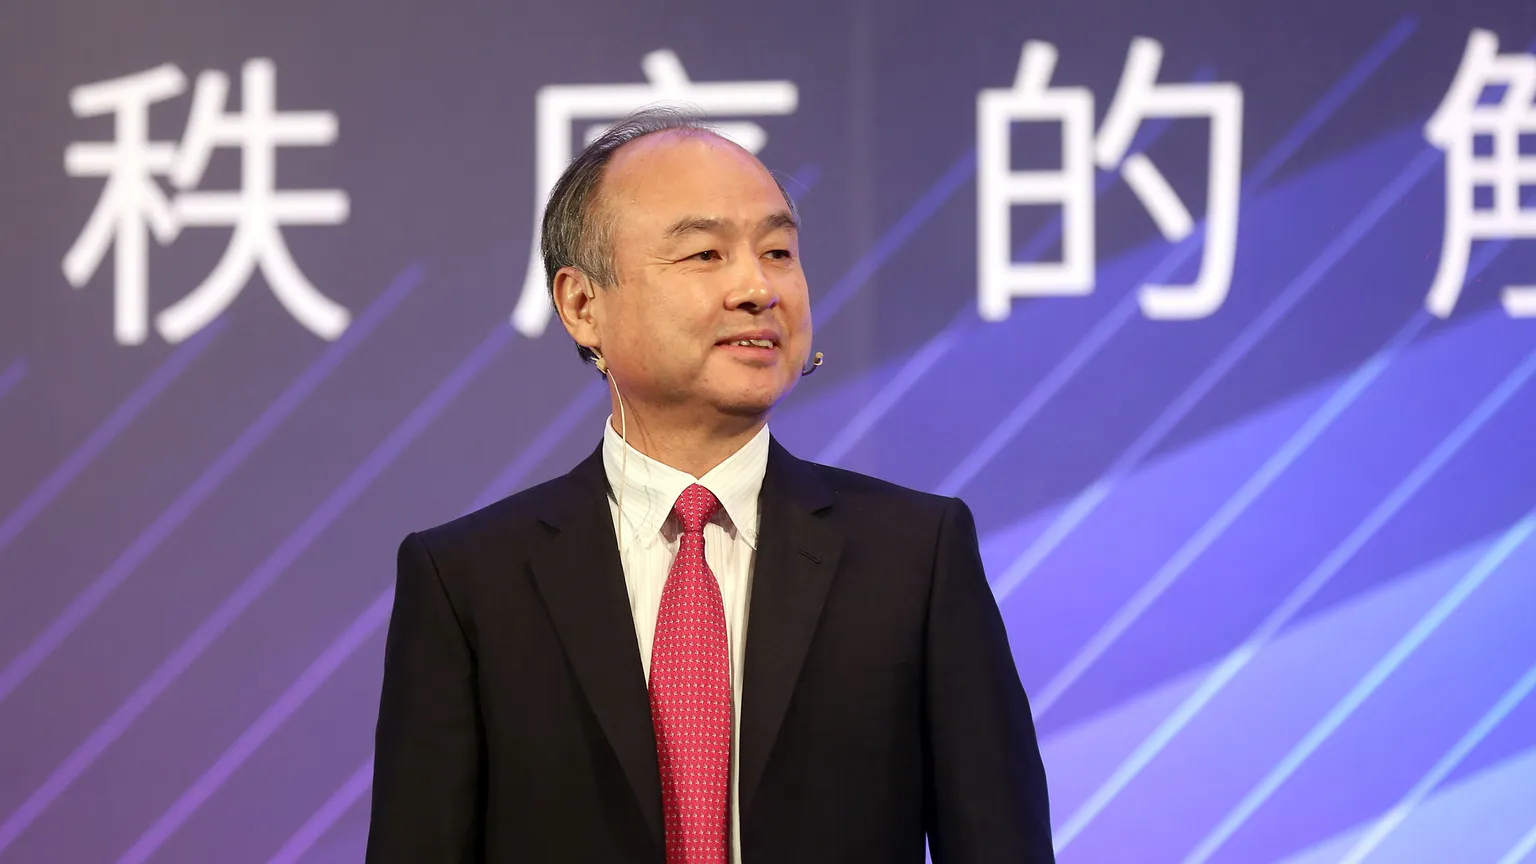 Masayoshi Son, Japanese business magnate and investor who is the founder and current chief executive officer of Japanese holding conglomerate SoftBank. Image: Glen Photo / Shutterstock.com